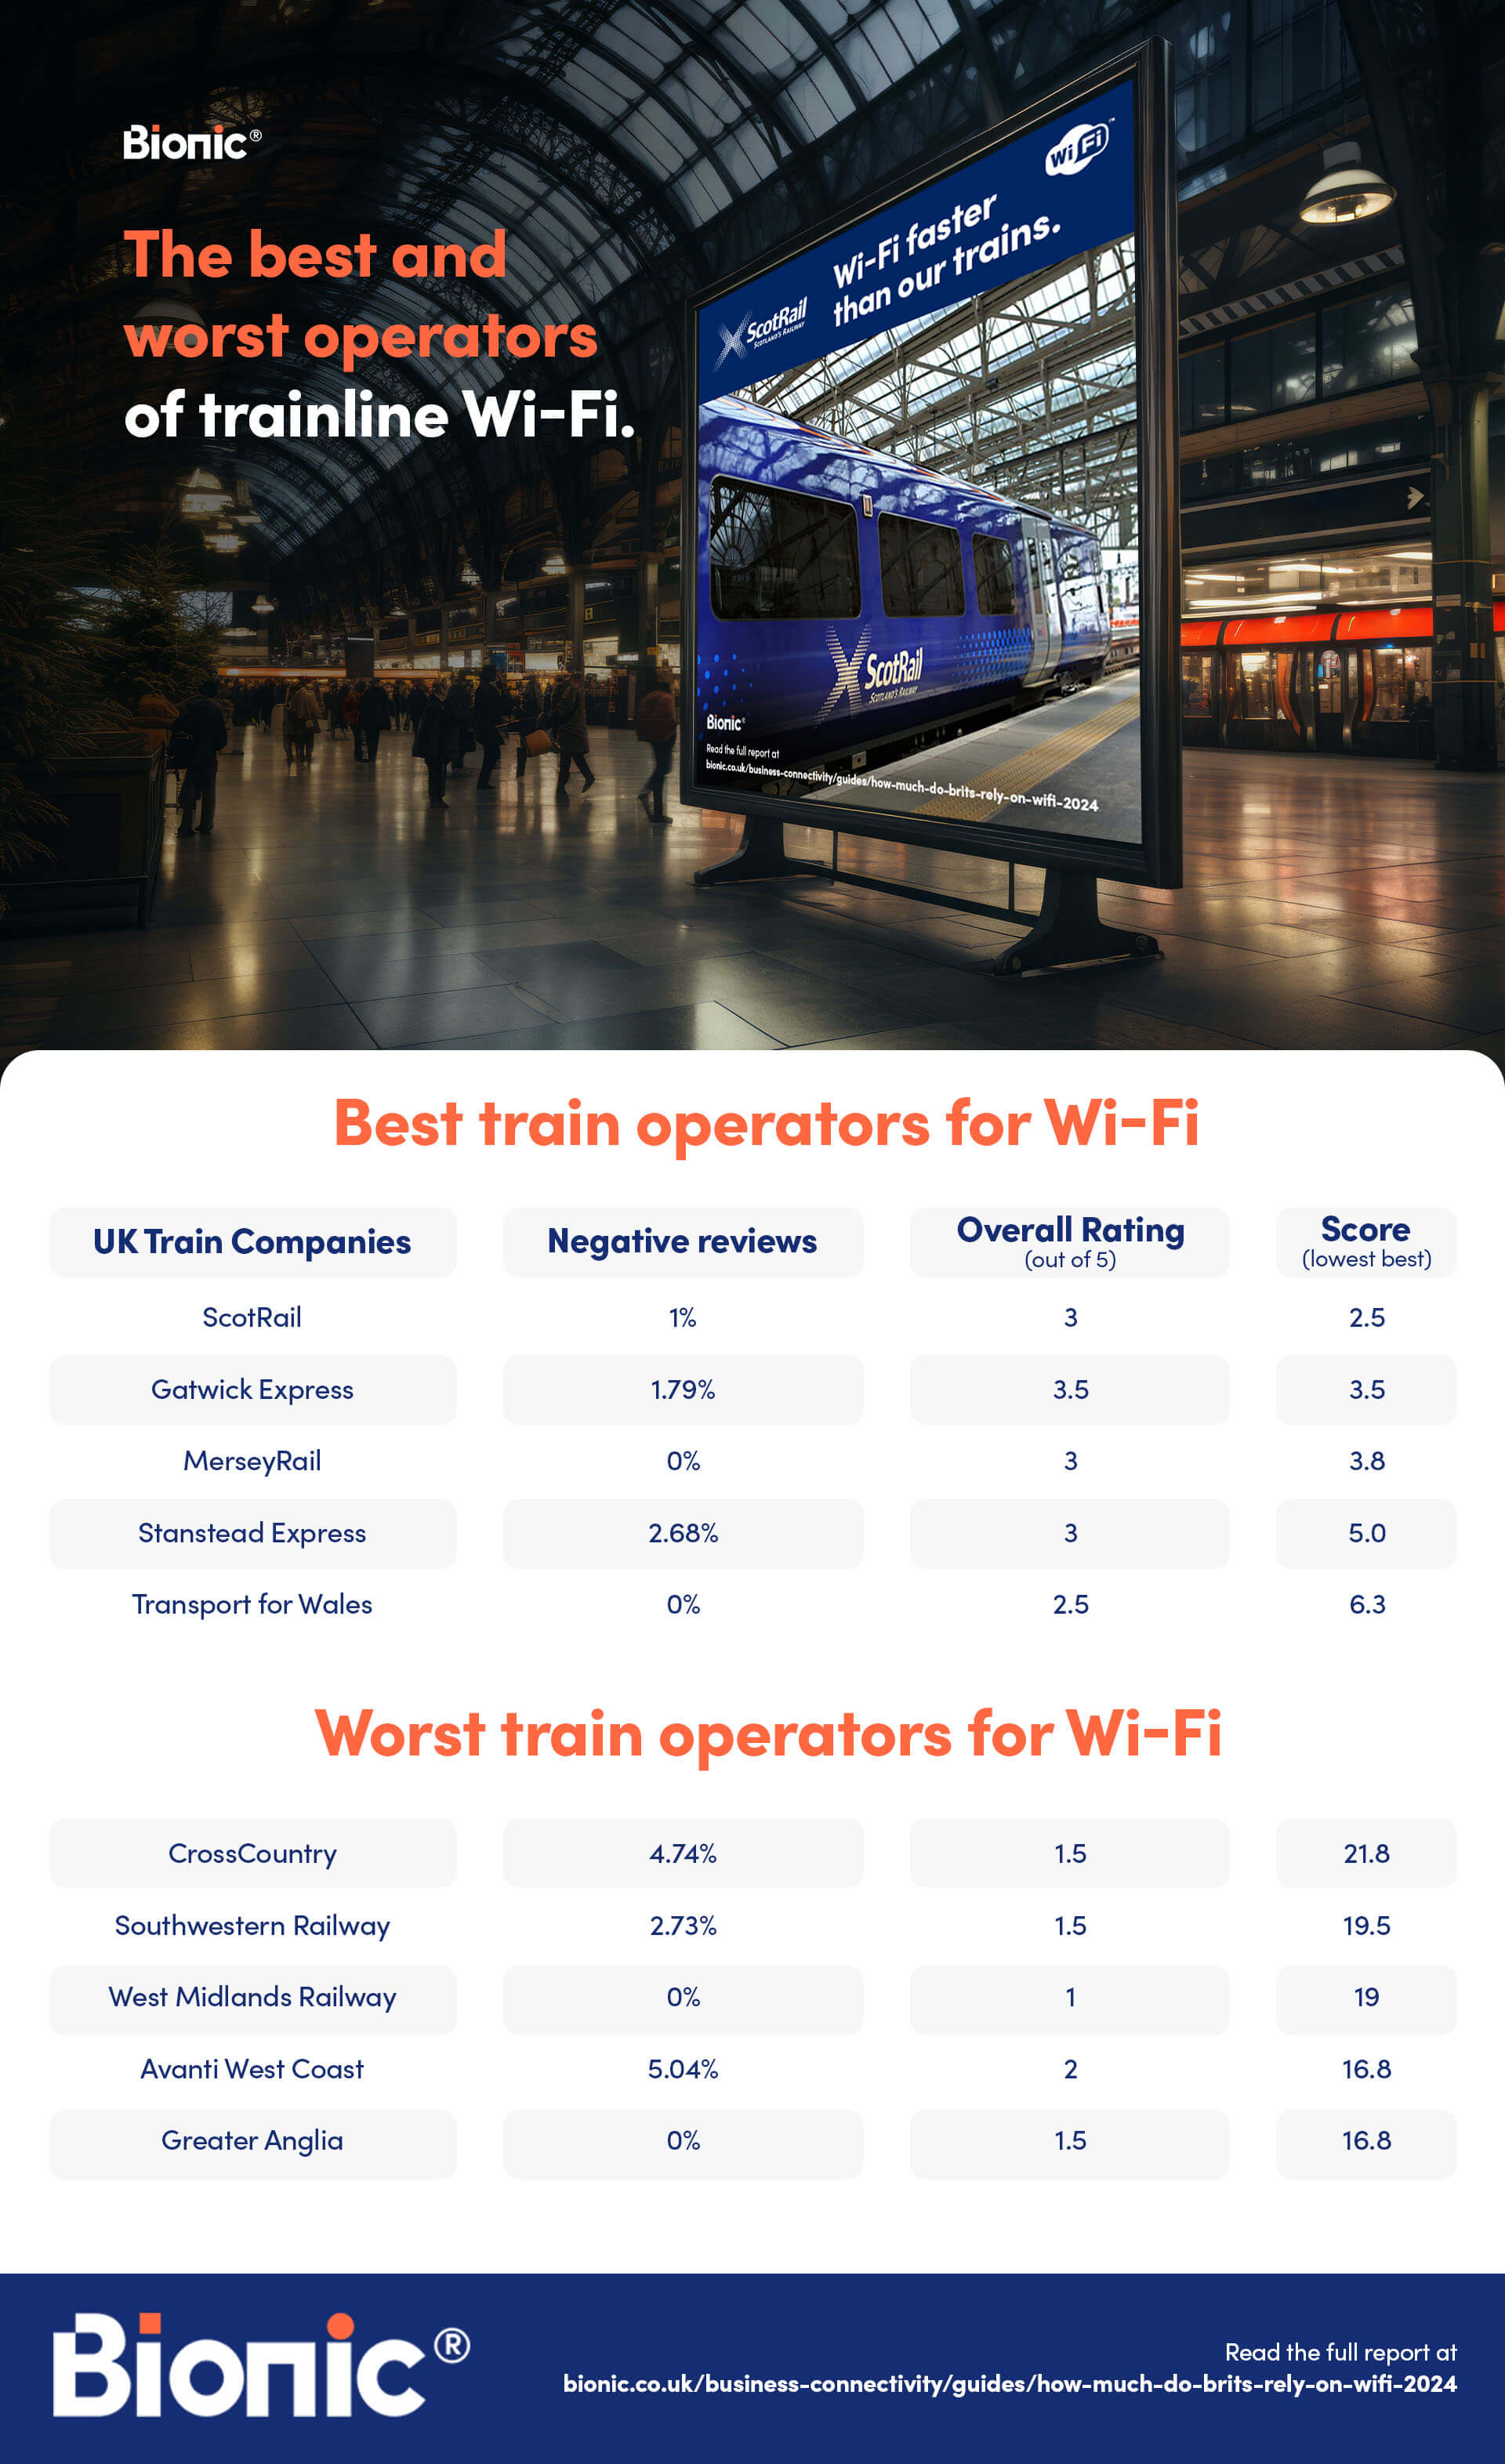 Infographic stating the best and worst train operators for Wi-Fi in the UK